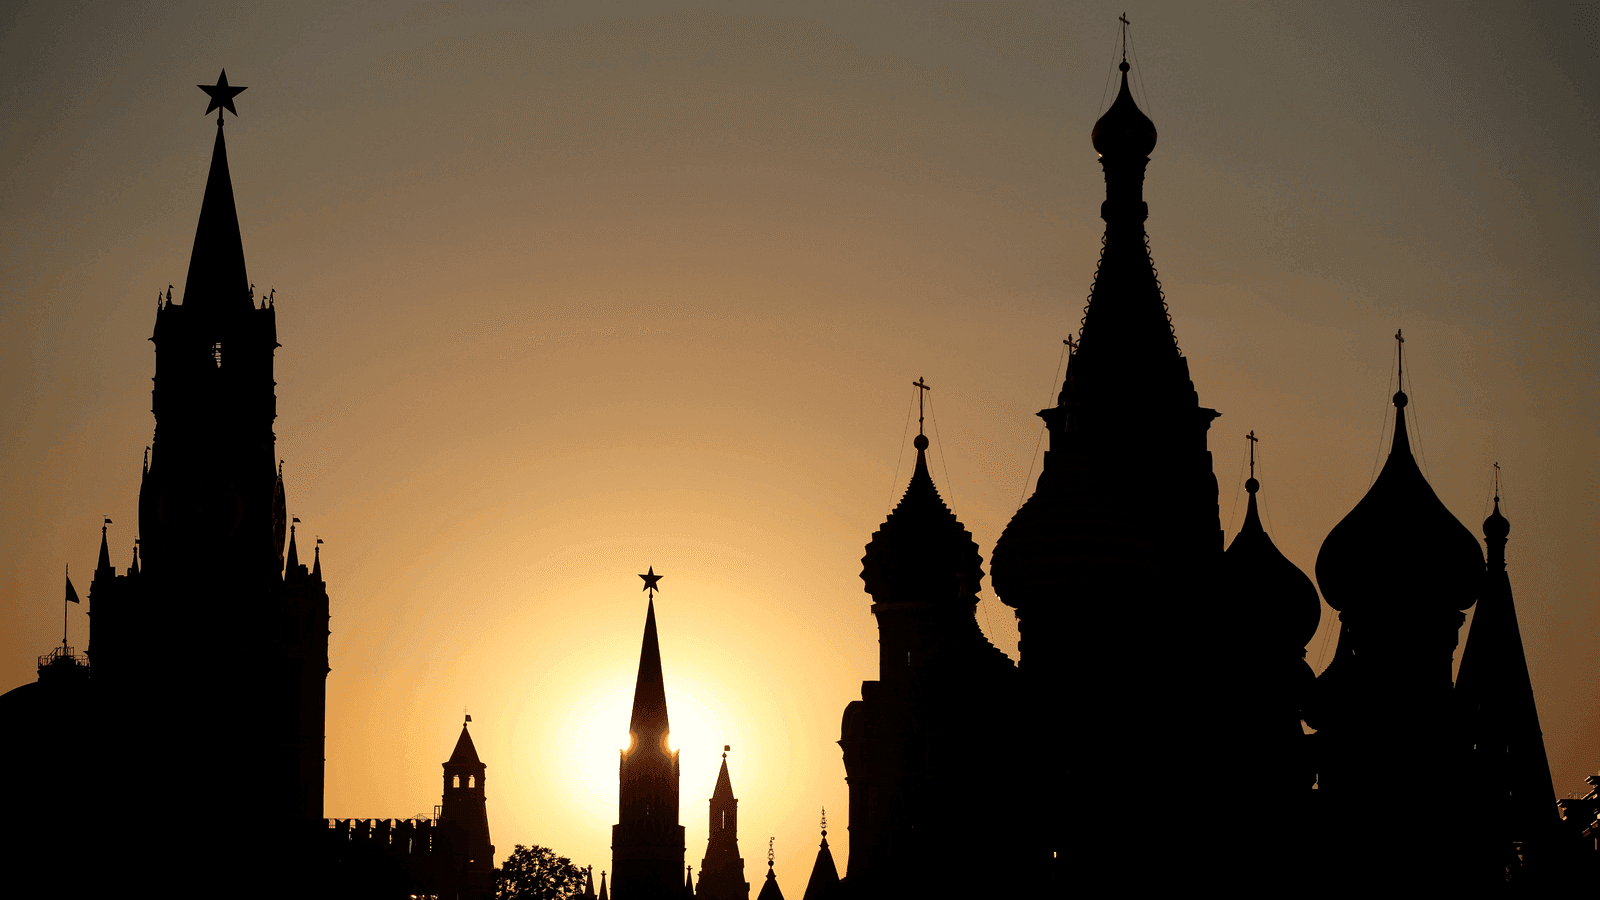 a profile view of the Kremlin in Moscow at sunset